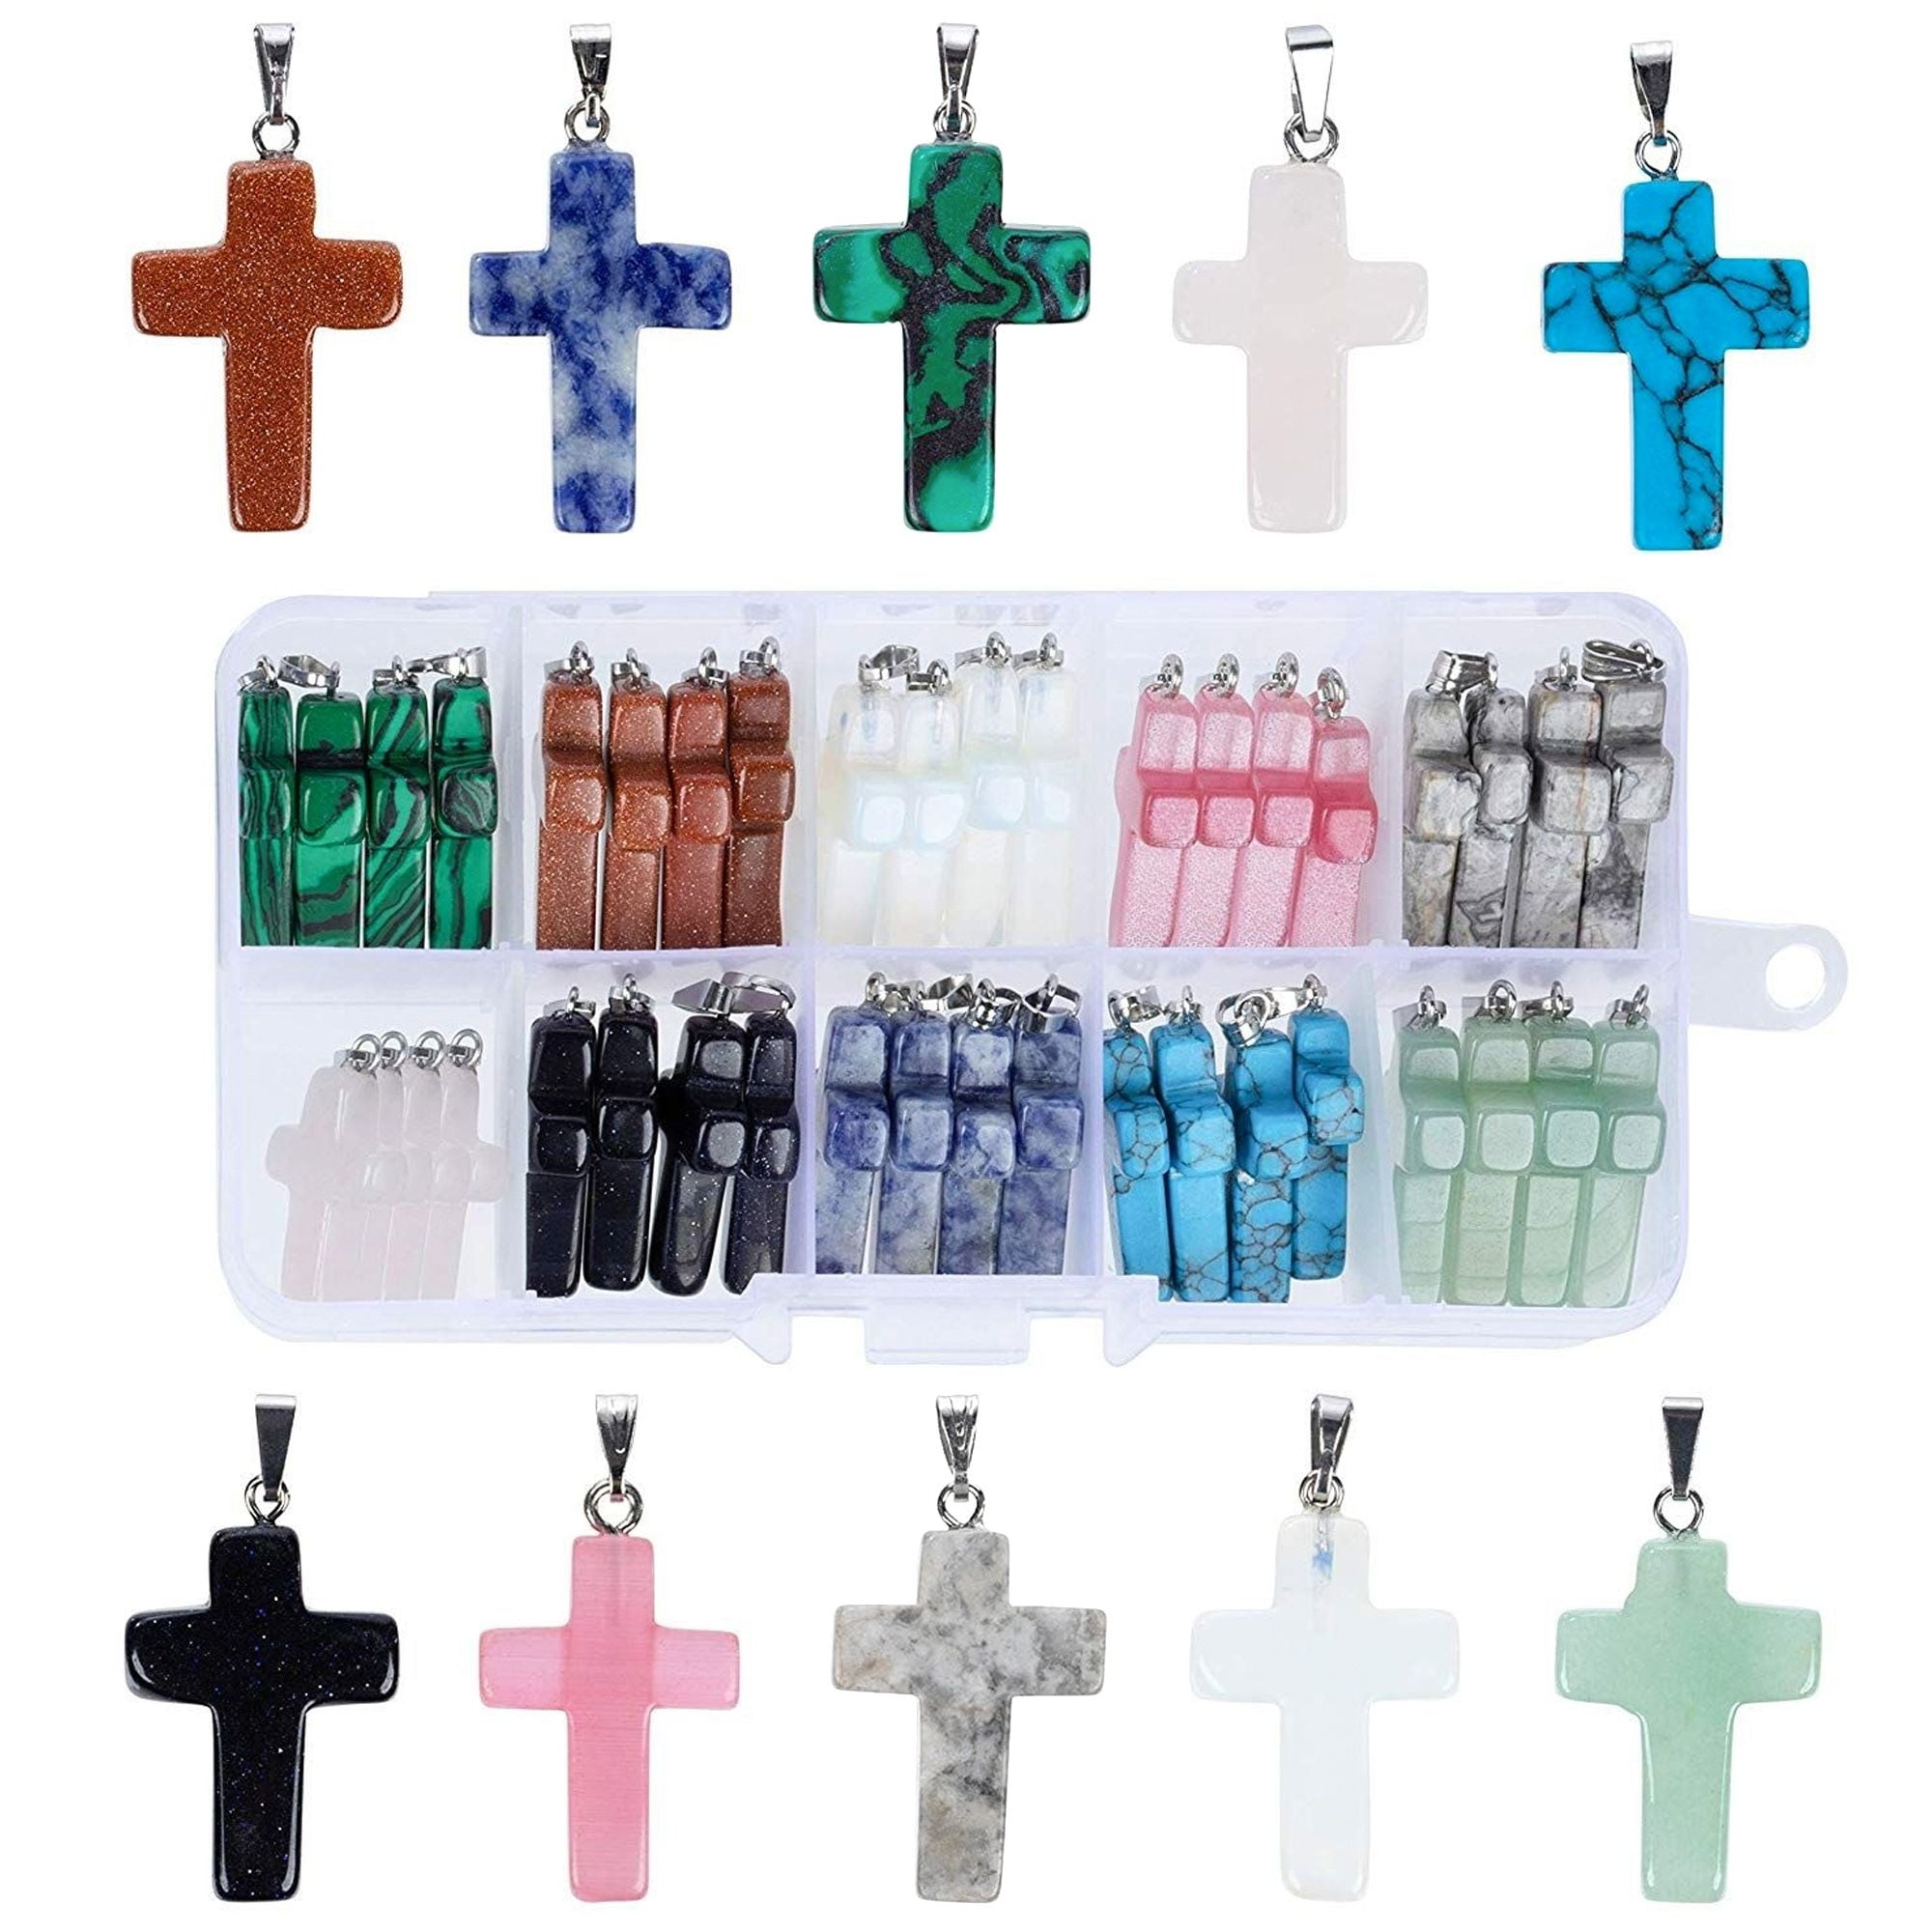 100 Pcs Assorted Colors Natural Stone Cross Gemstone Pendant Charms with  100 Pcs Ropes Cross Quartz Crystal Chakra Charms Cross Charms for Jewelry